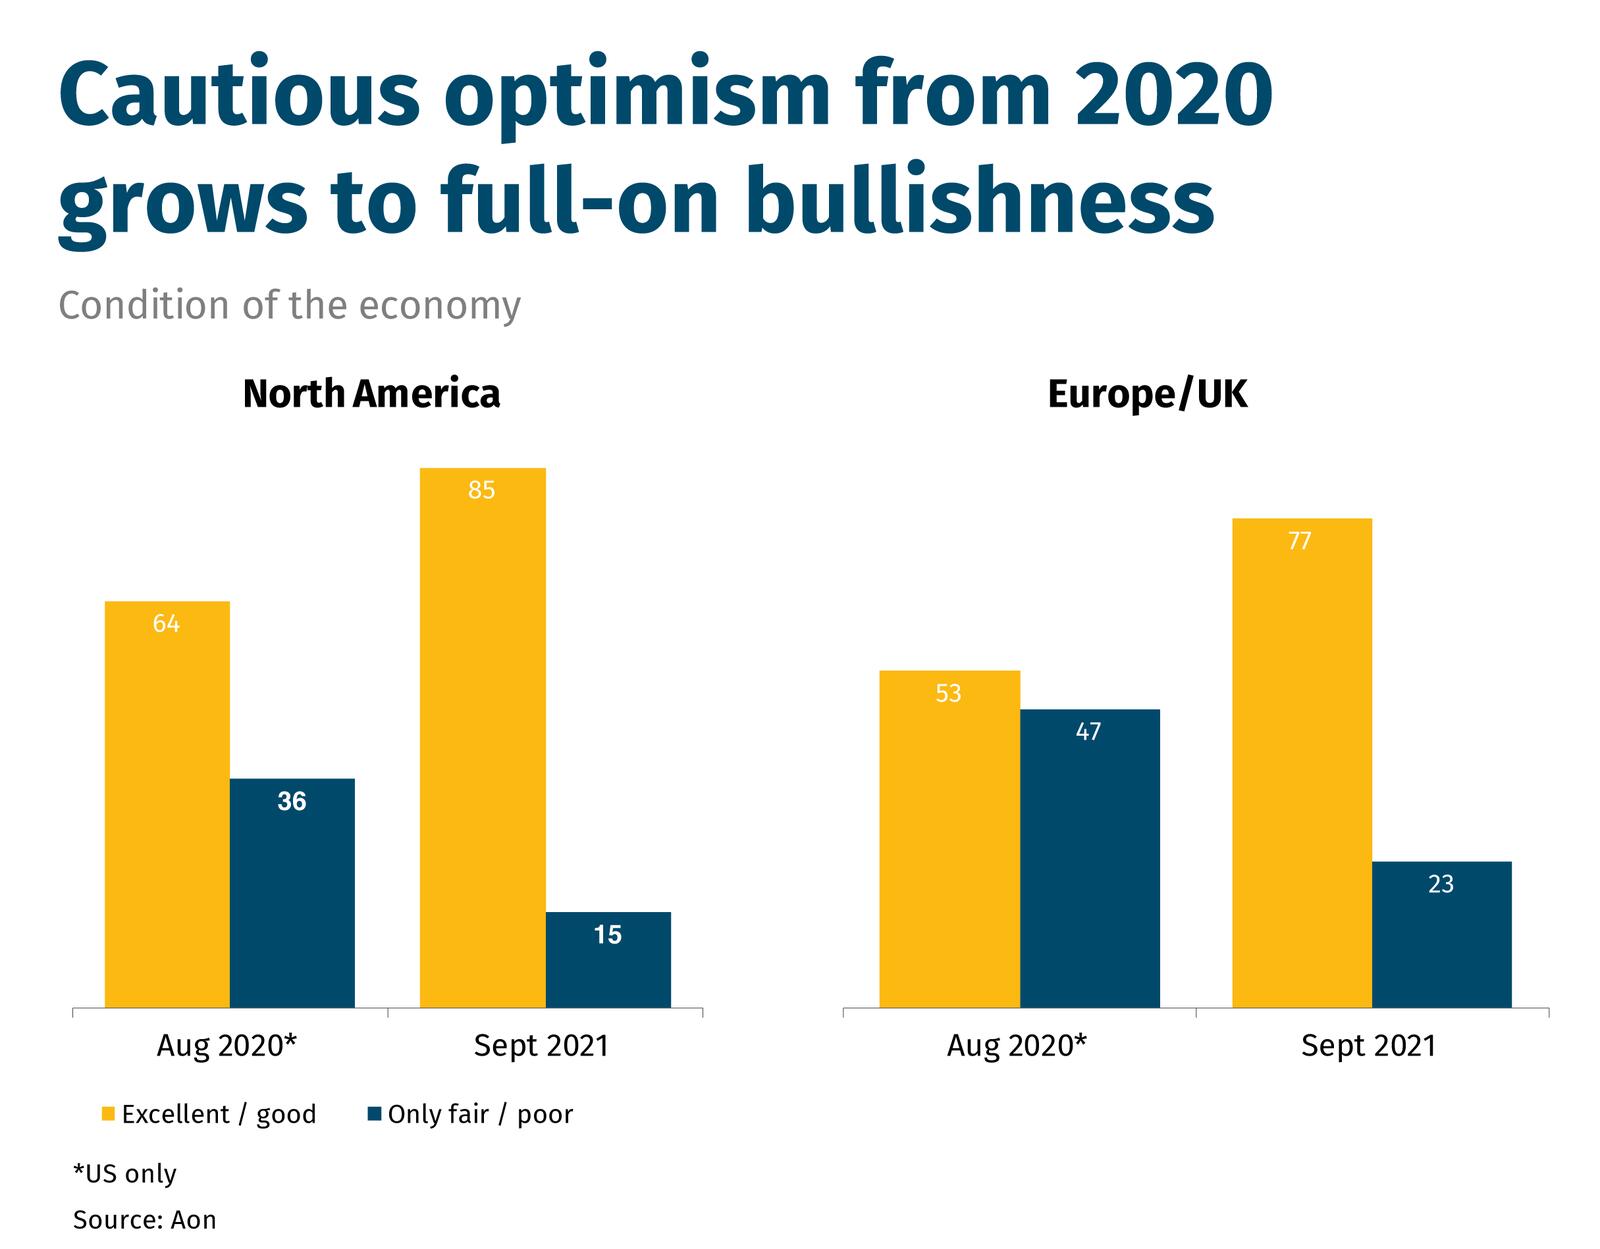 Cautious-optimism-from-2020-grows-to-full-on-bullishness